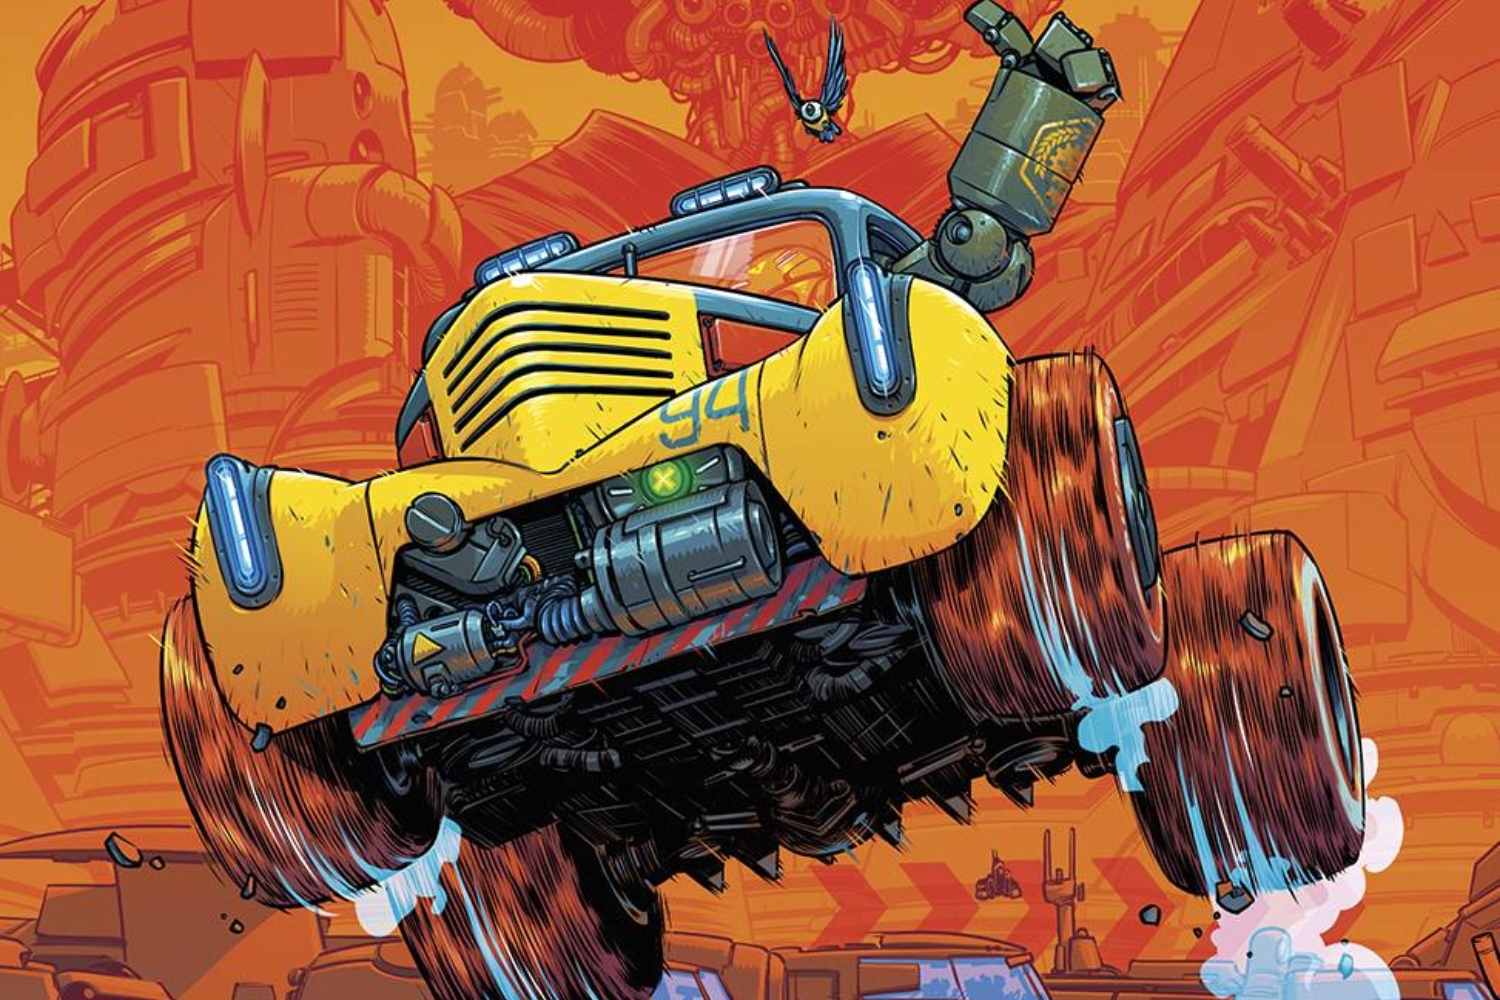 'Petrol Head' #1 takes the checkered flag for dystopian sci-fi